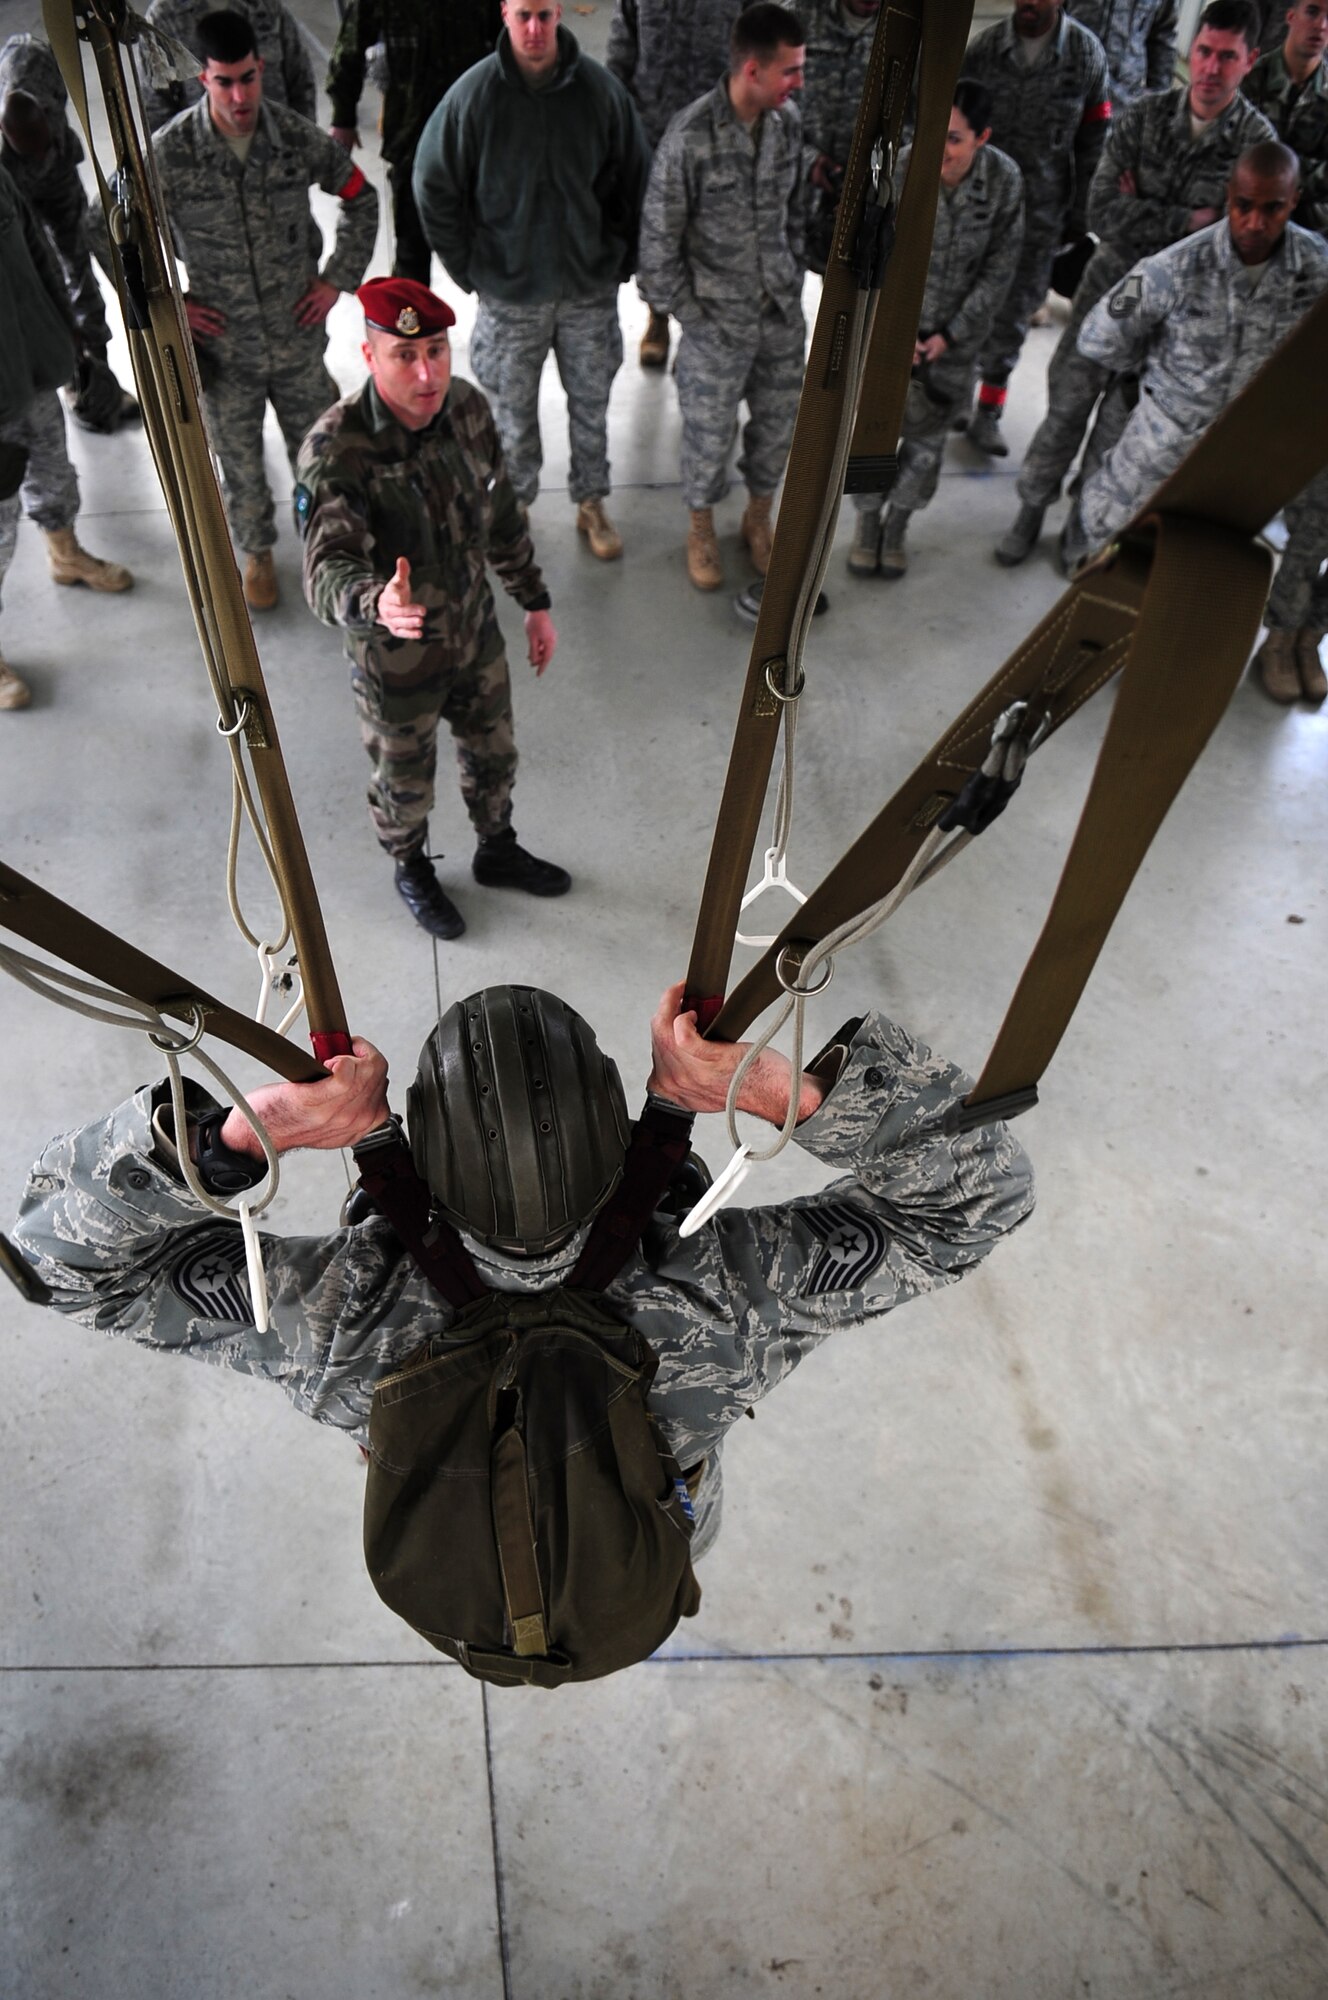 French Airborne Academy instructor Master Sgt. Stephane Paternotte, instructs U.S. military members on proper body position while in a French parachute, using U.S. Air Force Tech. Sgt. Jason Shaffer as an example in simulated equipment durring training before a combined nation jump, March 3, 2010. Members of the 435th Contingency Response Group and the 5th Quartermaster Company joined with their French military counterparts for a week of training at the École des troupes aéroportées (ETAP), or School of Airborne Troops, a military school dedicated to training the military paratroopers   of the French army, located in the town of Pau, in the département of Pyrénées-Atlantiques, France.  The ETAP is responsible for training paratroopers, and for international cooperation and promotion of paratroop culture. (U.S. Air Force Photo by Staff Sgt. Jocelyn Rich)